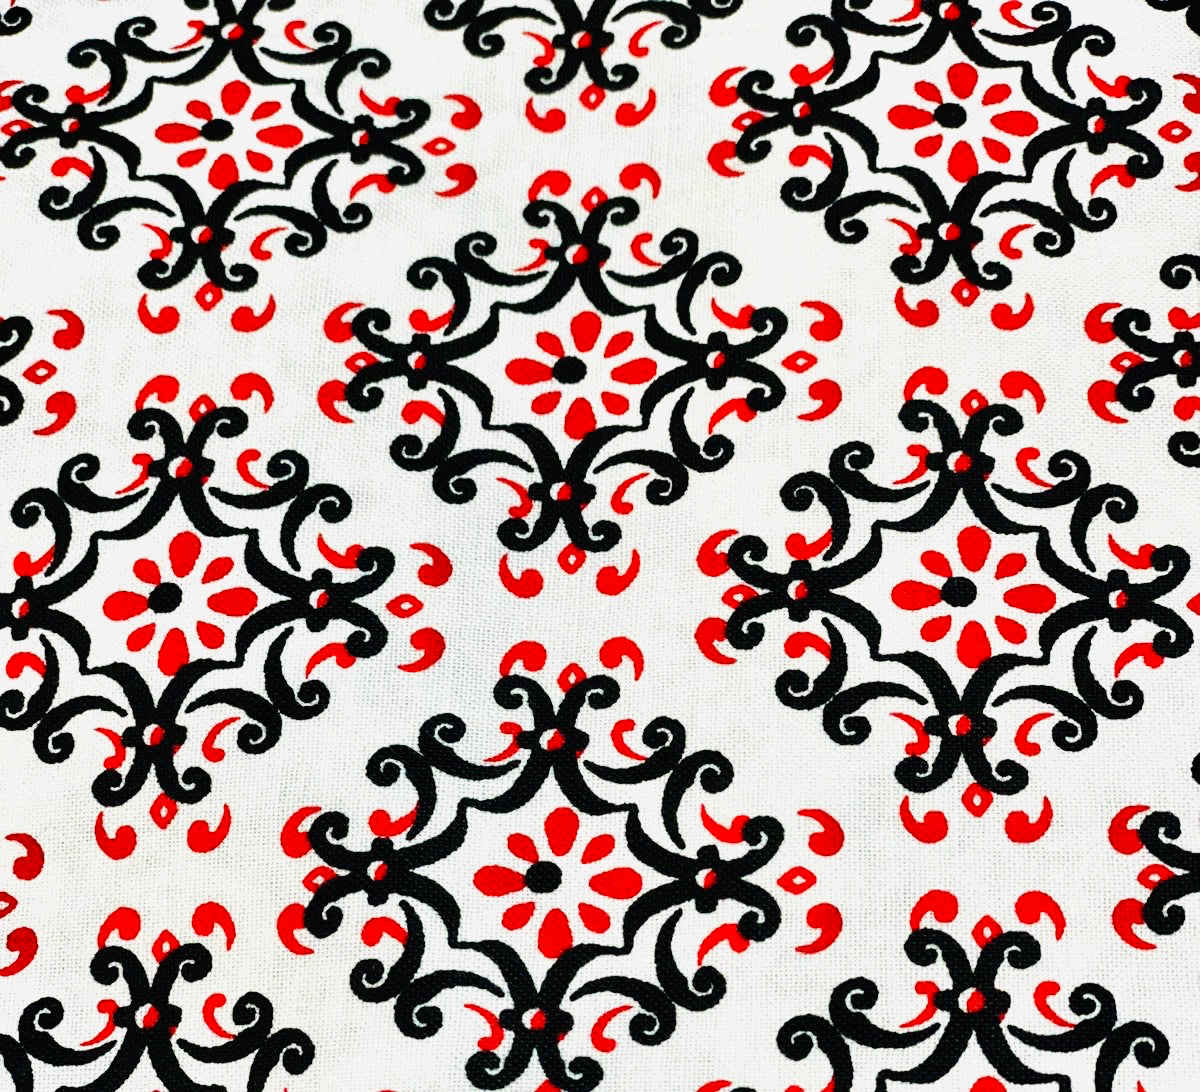 Cotton 3 ply mask black n red floral